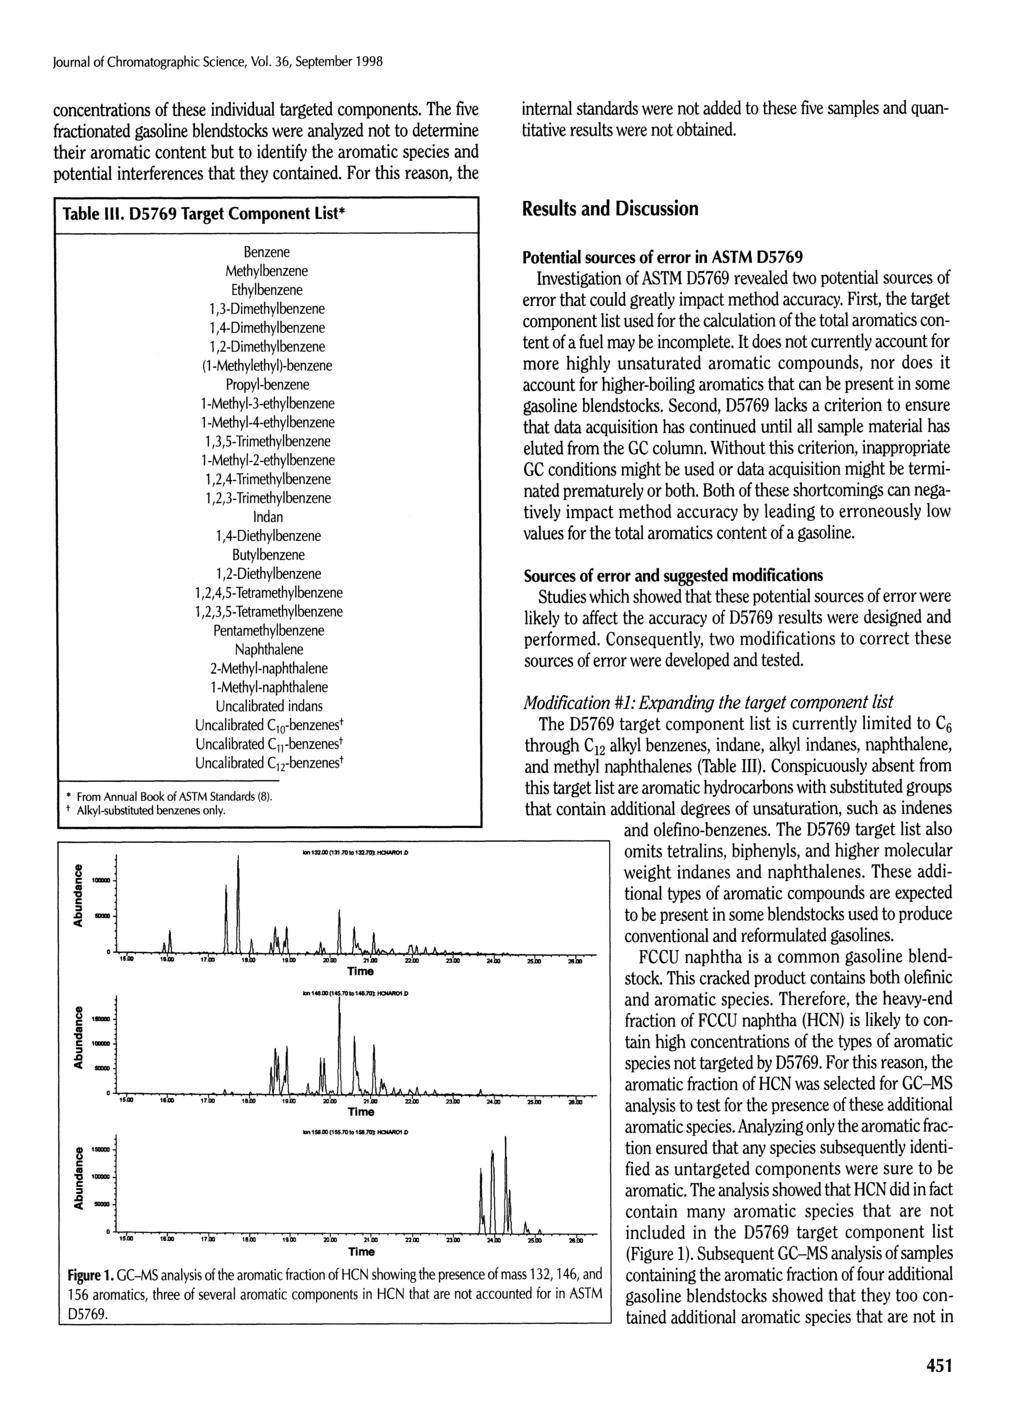 journal of Chromatographic Science, Vol. 36, September 1998 concentrations of these individual targeted components.